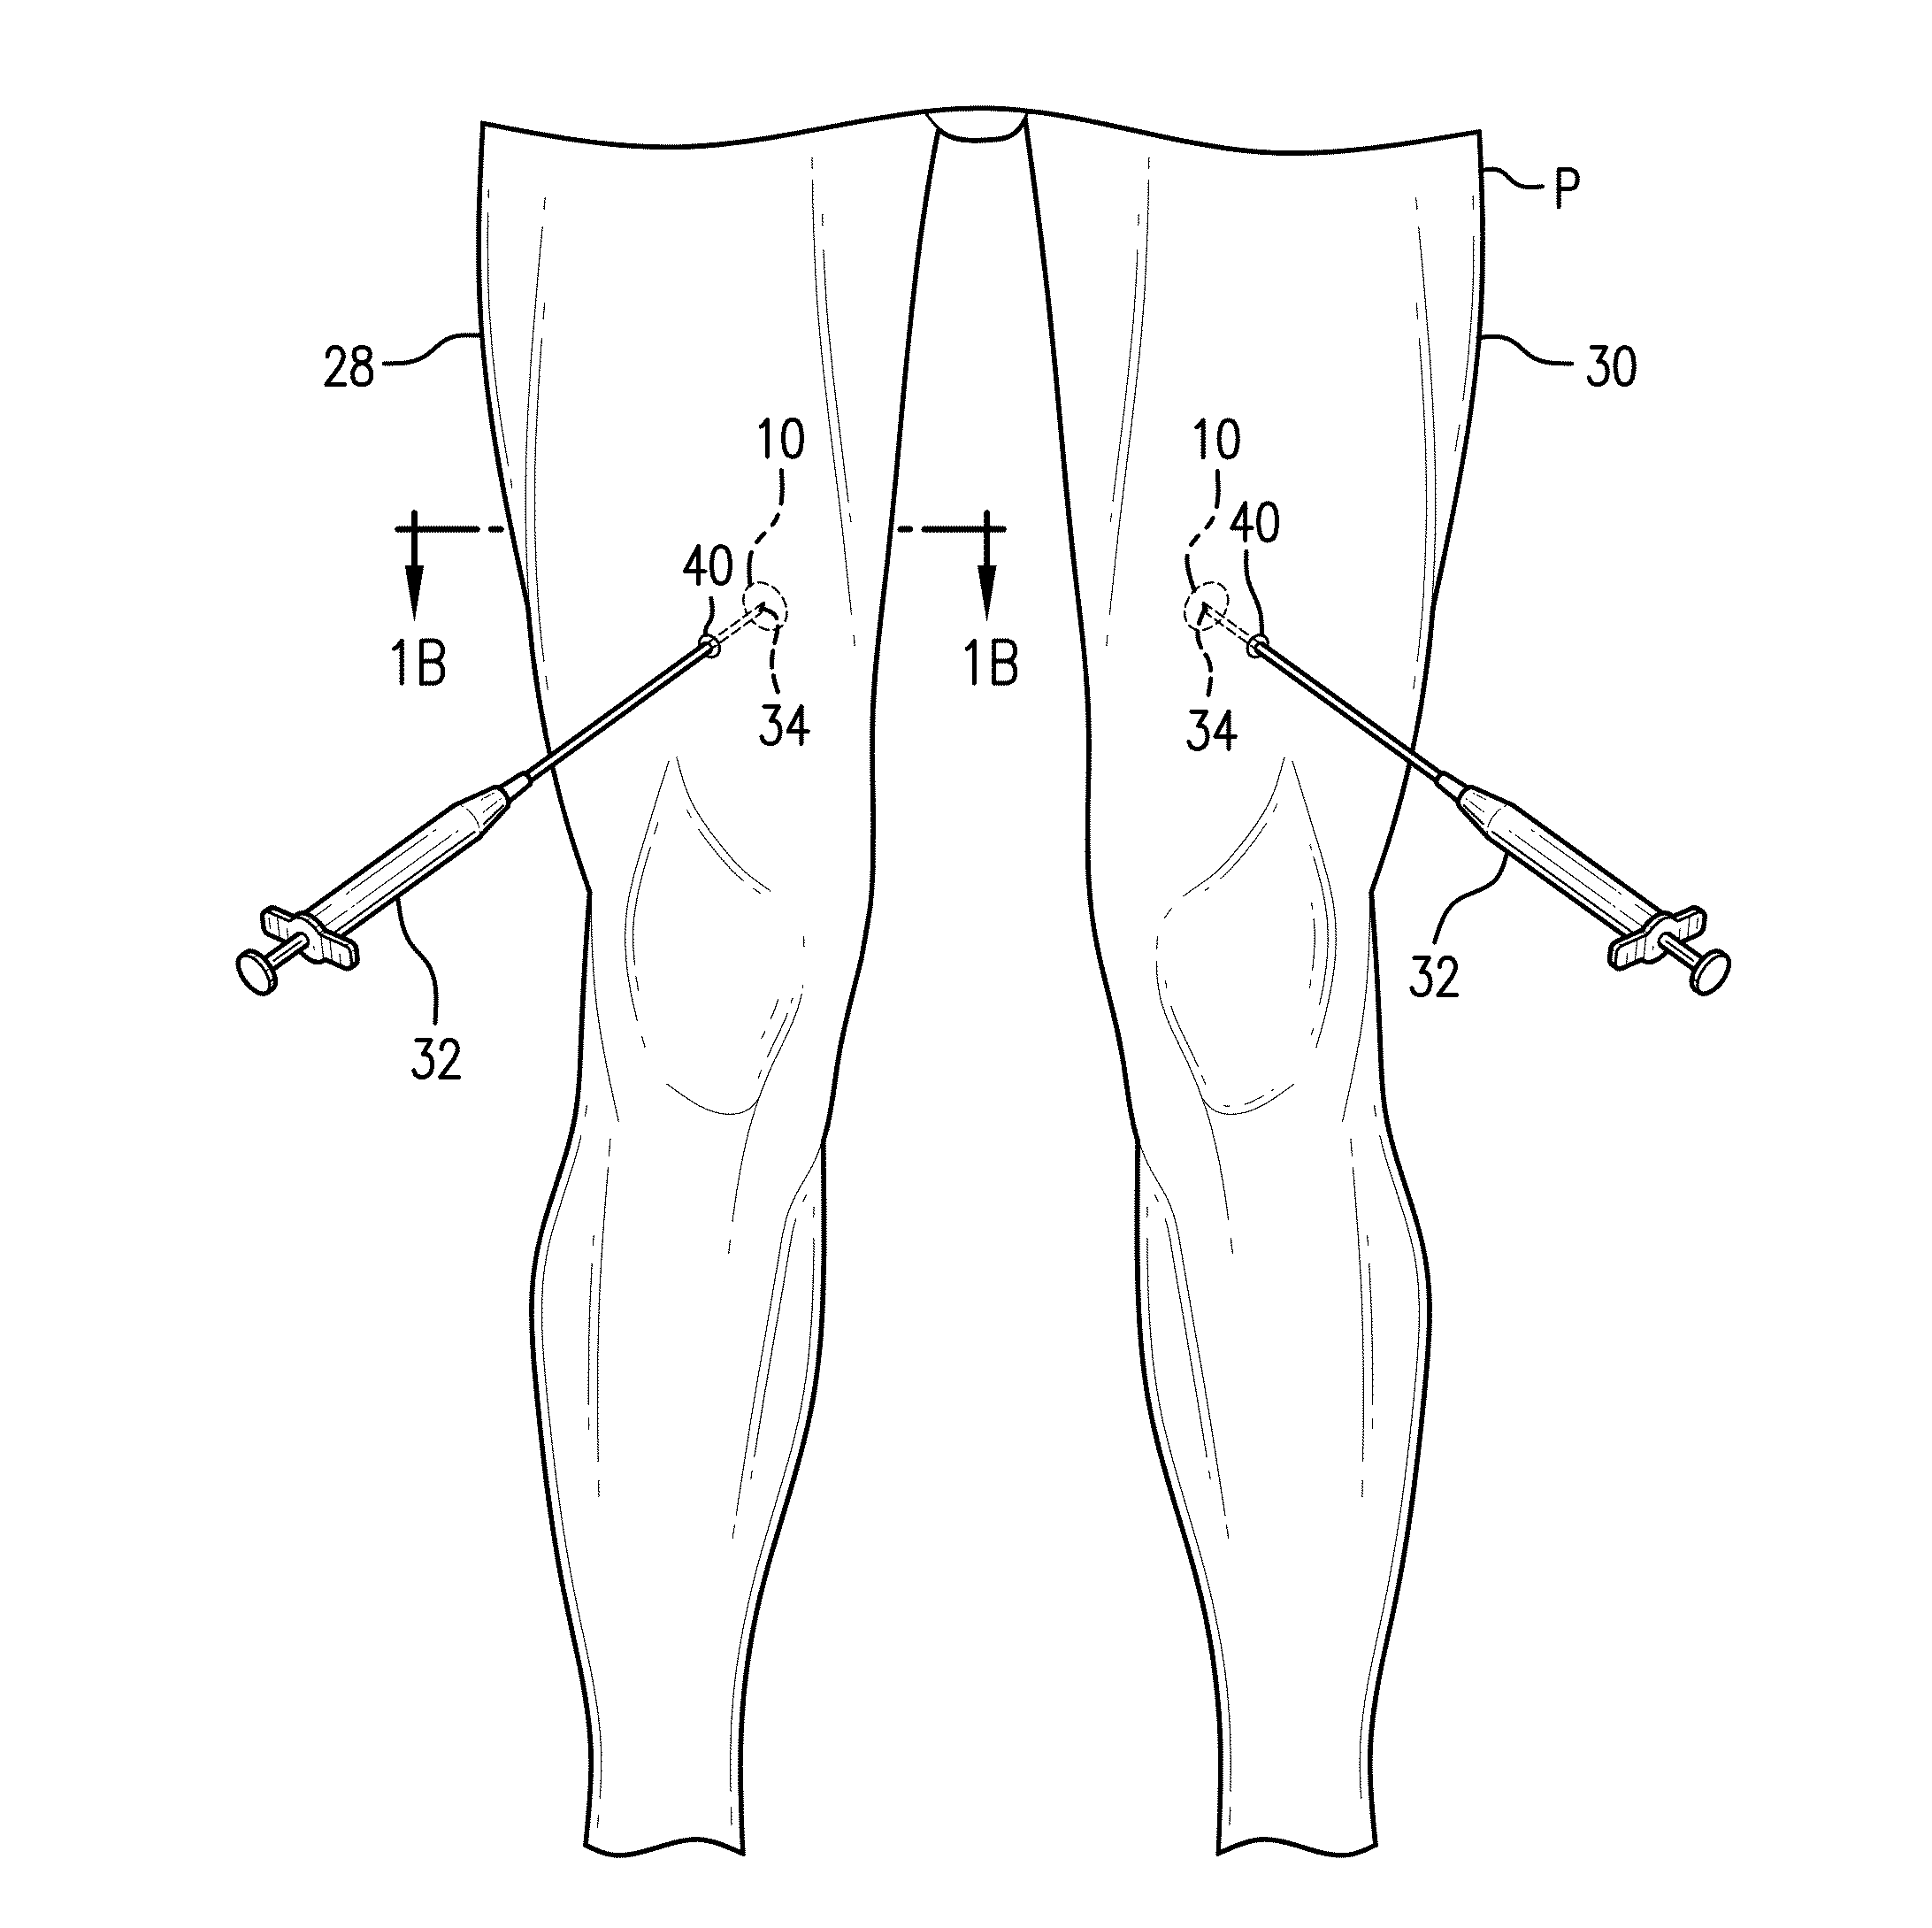 Method for Treating and Confirming Diagnosis of Exertional Compartment Syndrome